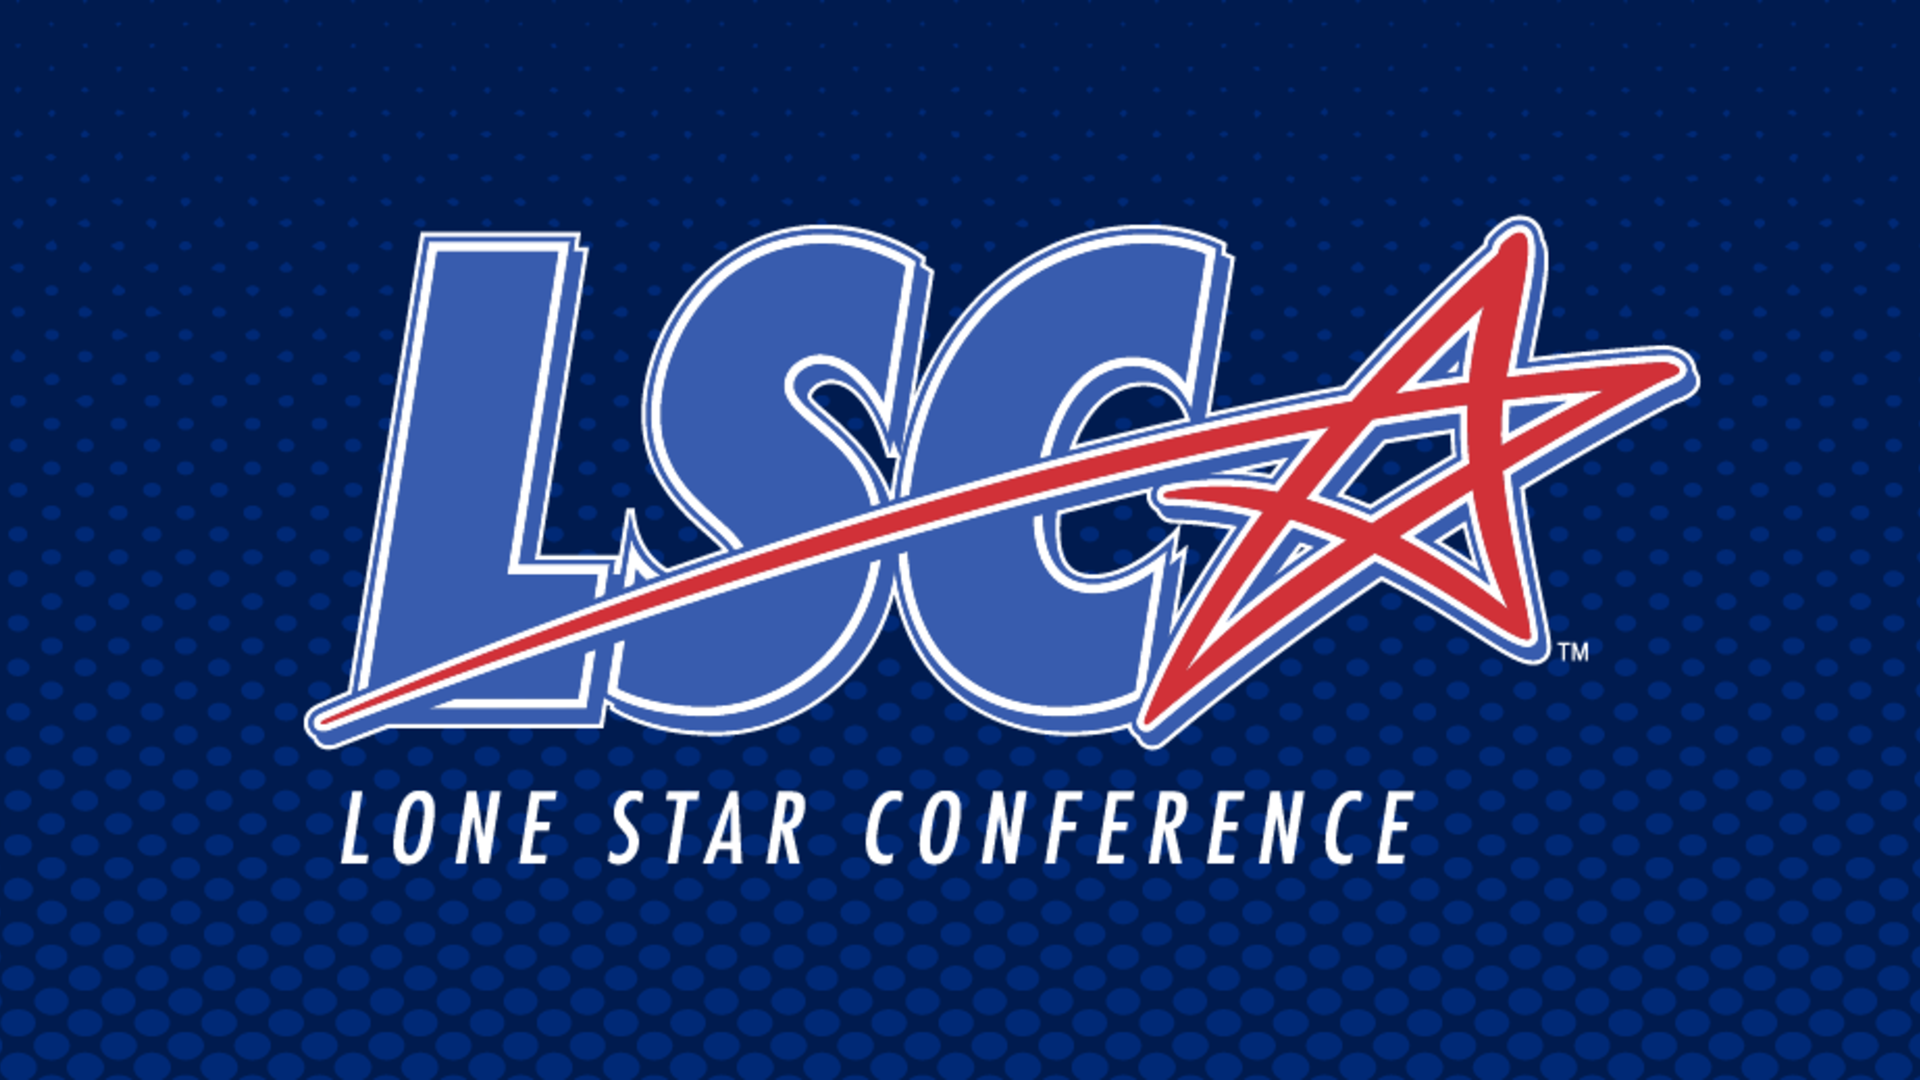 Lone Star Conference logo